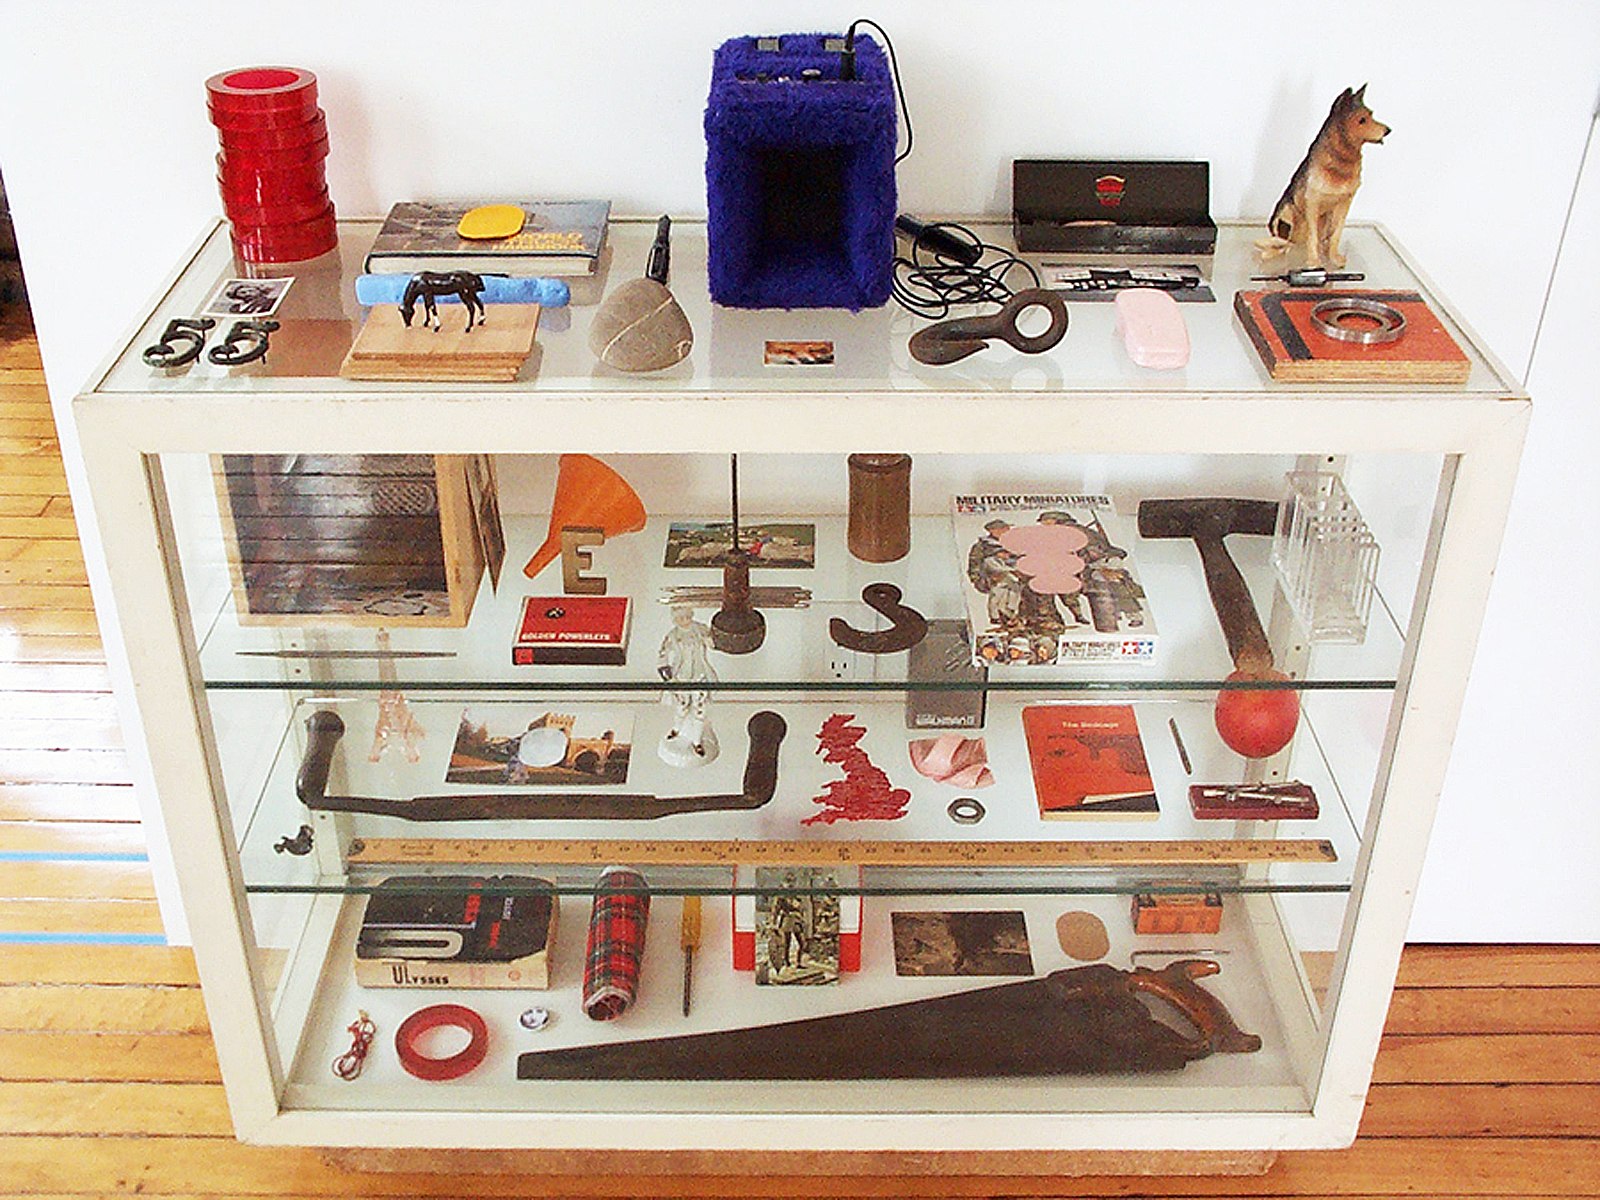 A white display case full of objects including saws, postcards and a dog figurine.